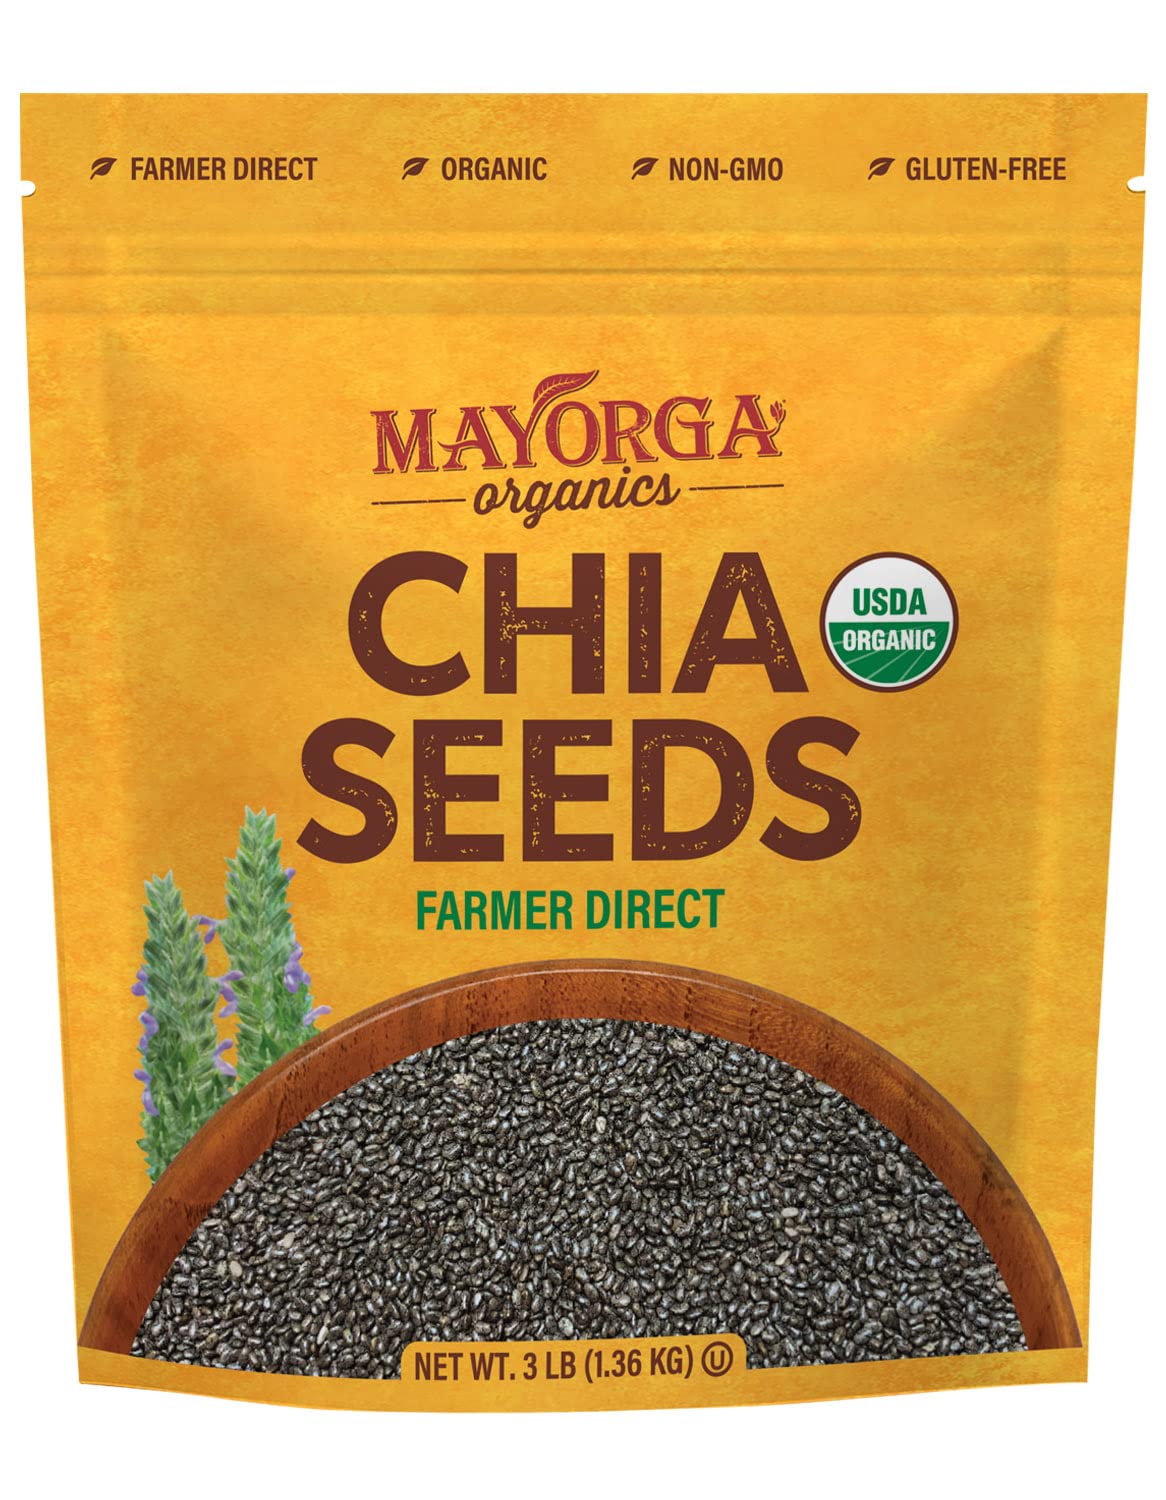 Mayorga Organic Raw Chia Seeds Resealable Bag | Superfood w/Plant-Based Omega 3 & Vegan Protein | USDA Certified, Gluten-Free, Non-GMO, Direct Trade, Kosher | Add to Breakfast, Oats & More